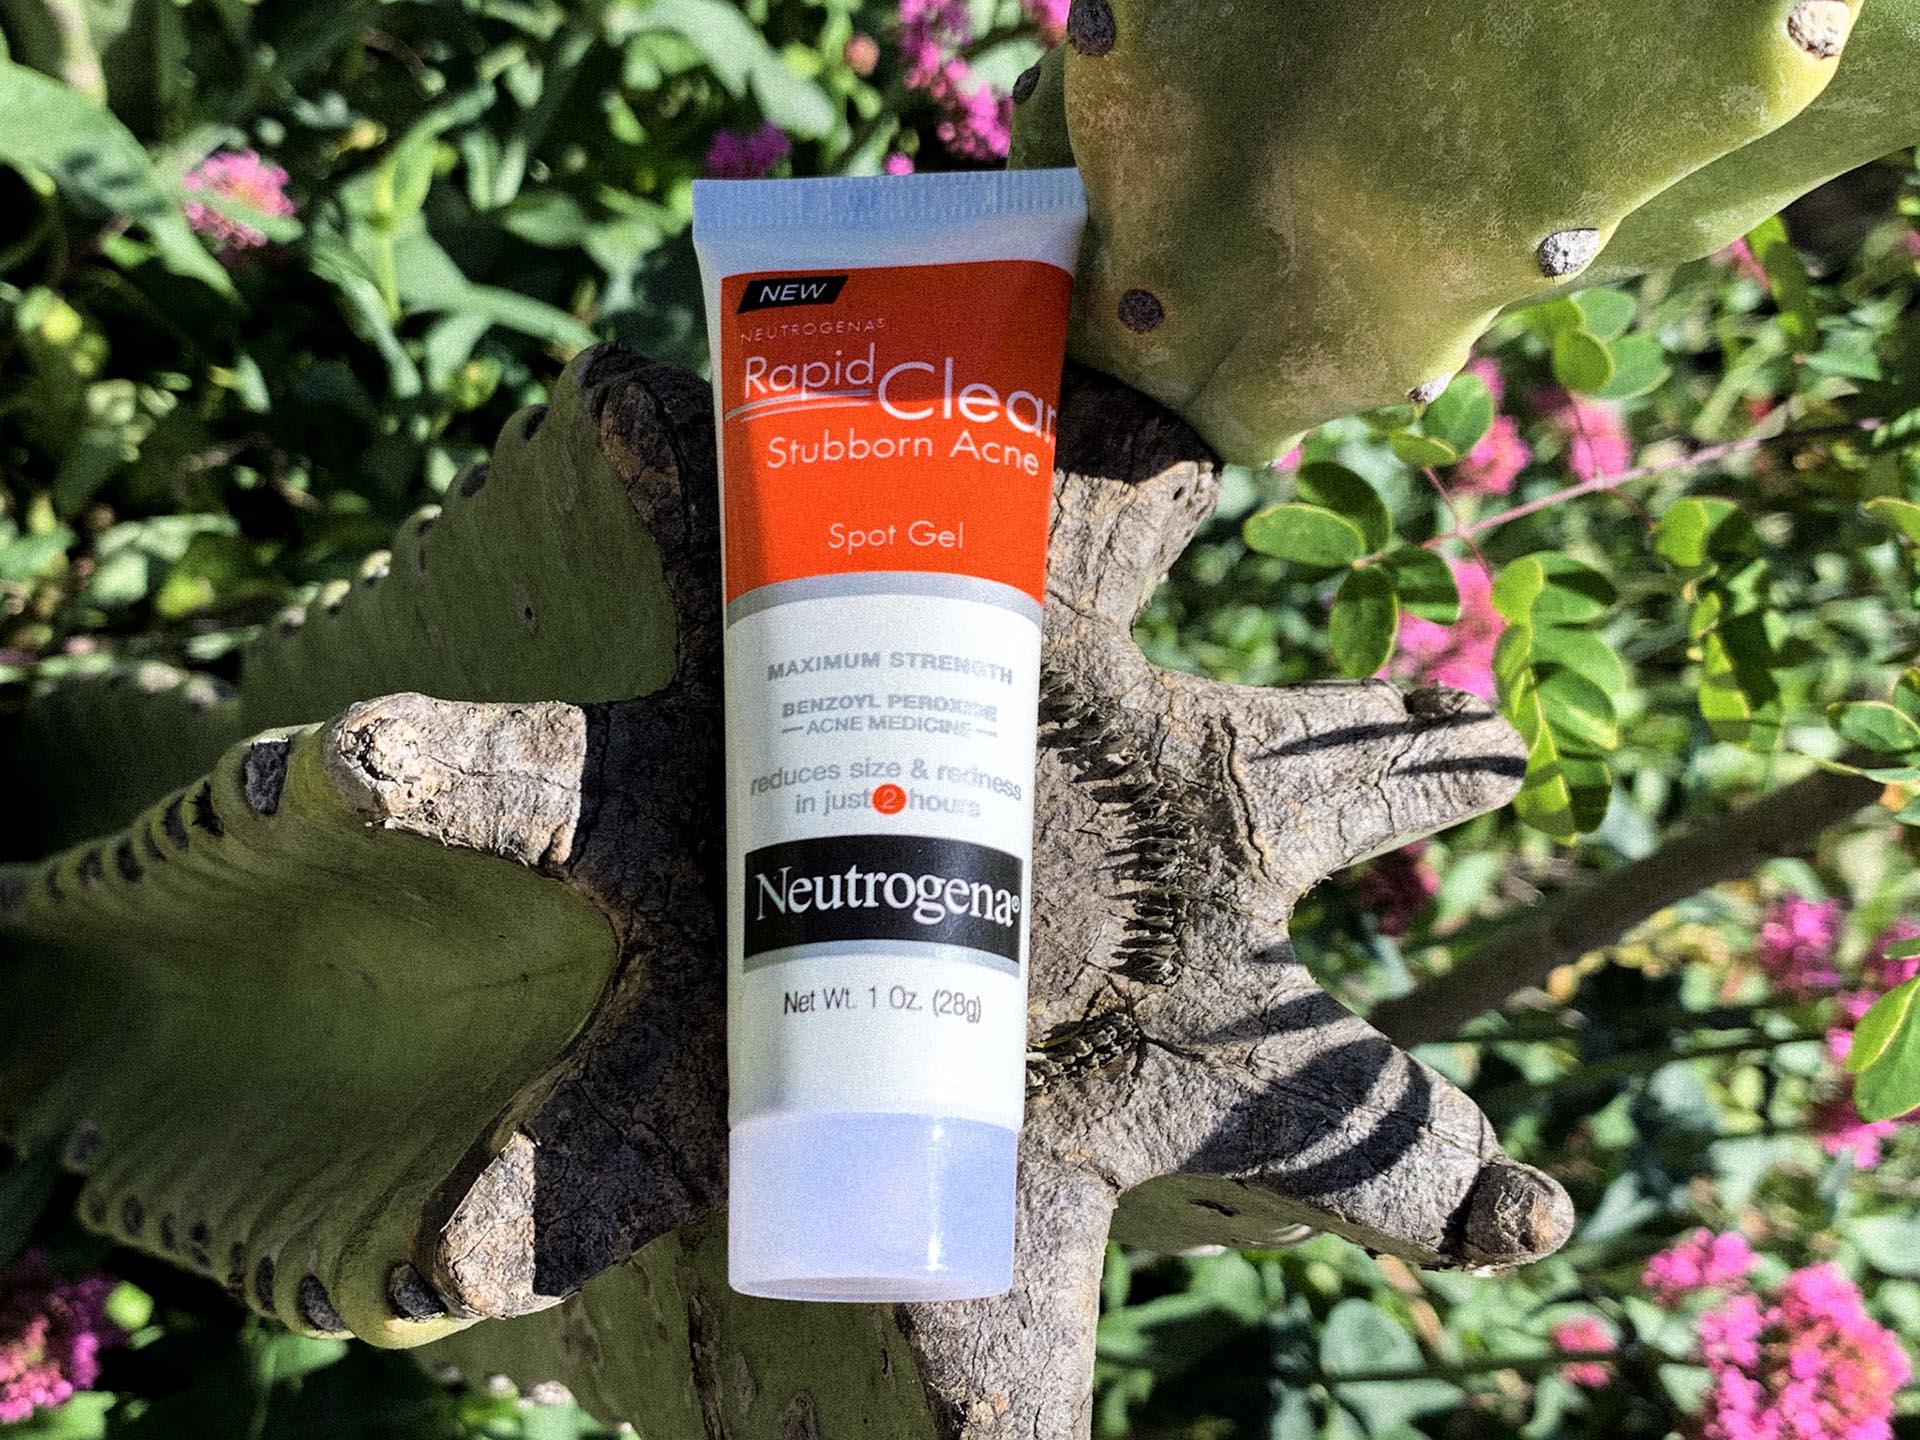 Neutrogena's rapid clear acne gel destroyed my cystic in a day